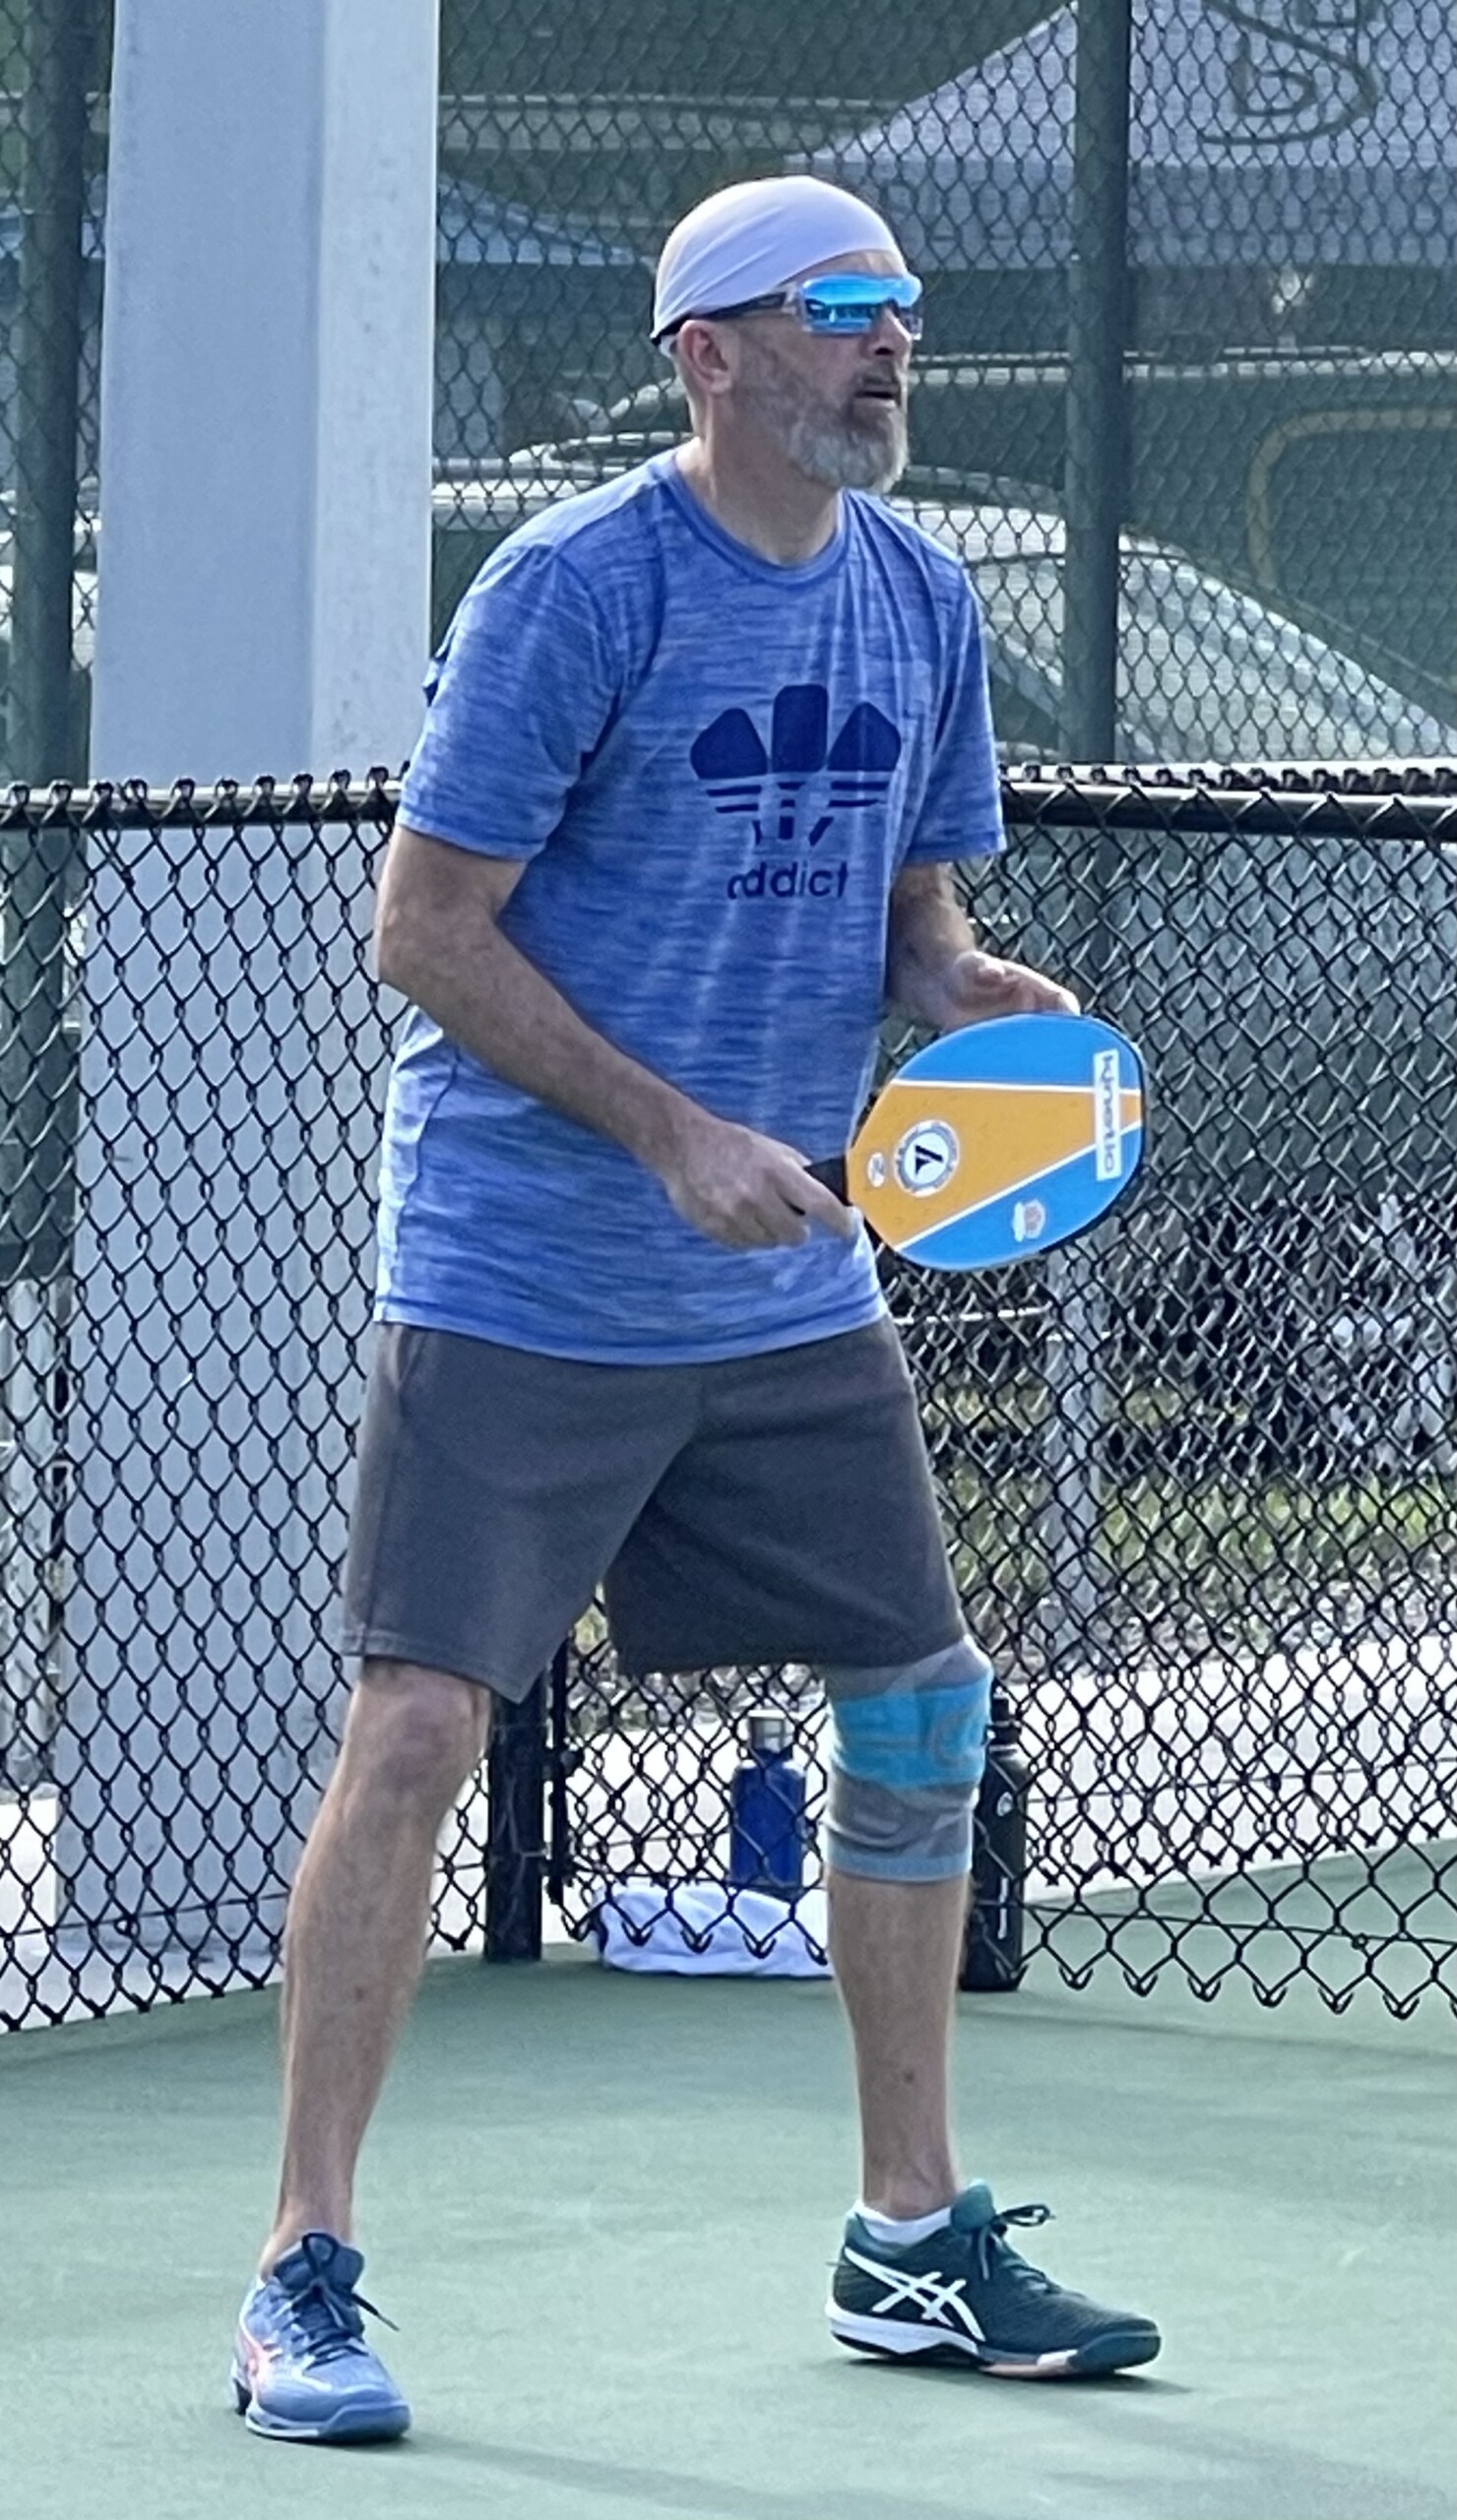 Mojo Playing in a Pickleball Tournament